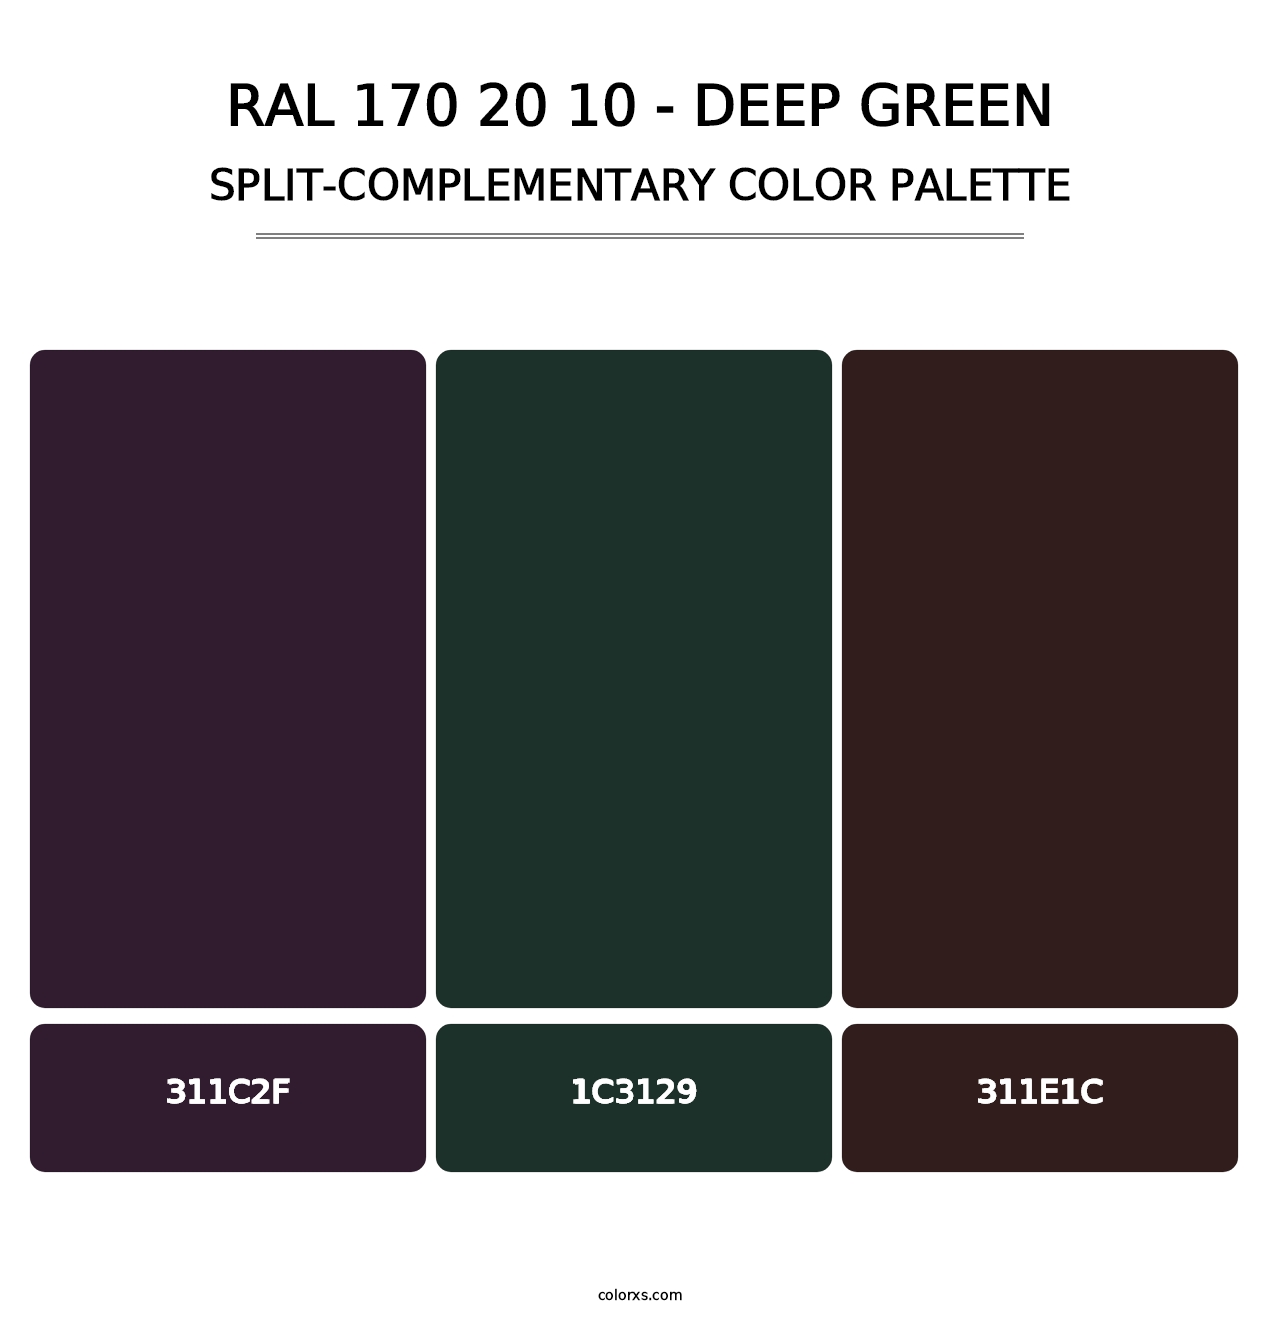 RAL 170 20 10 - Deep Green - Split-Complementary Color Palette